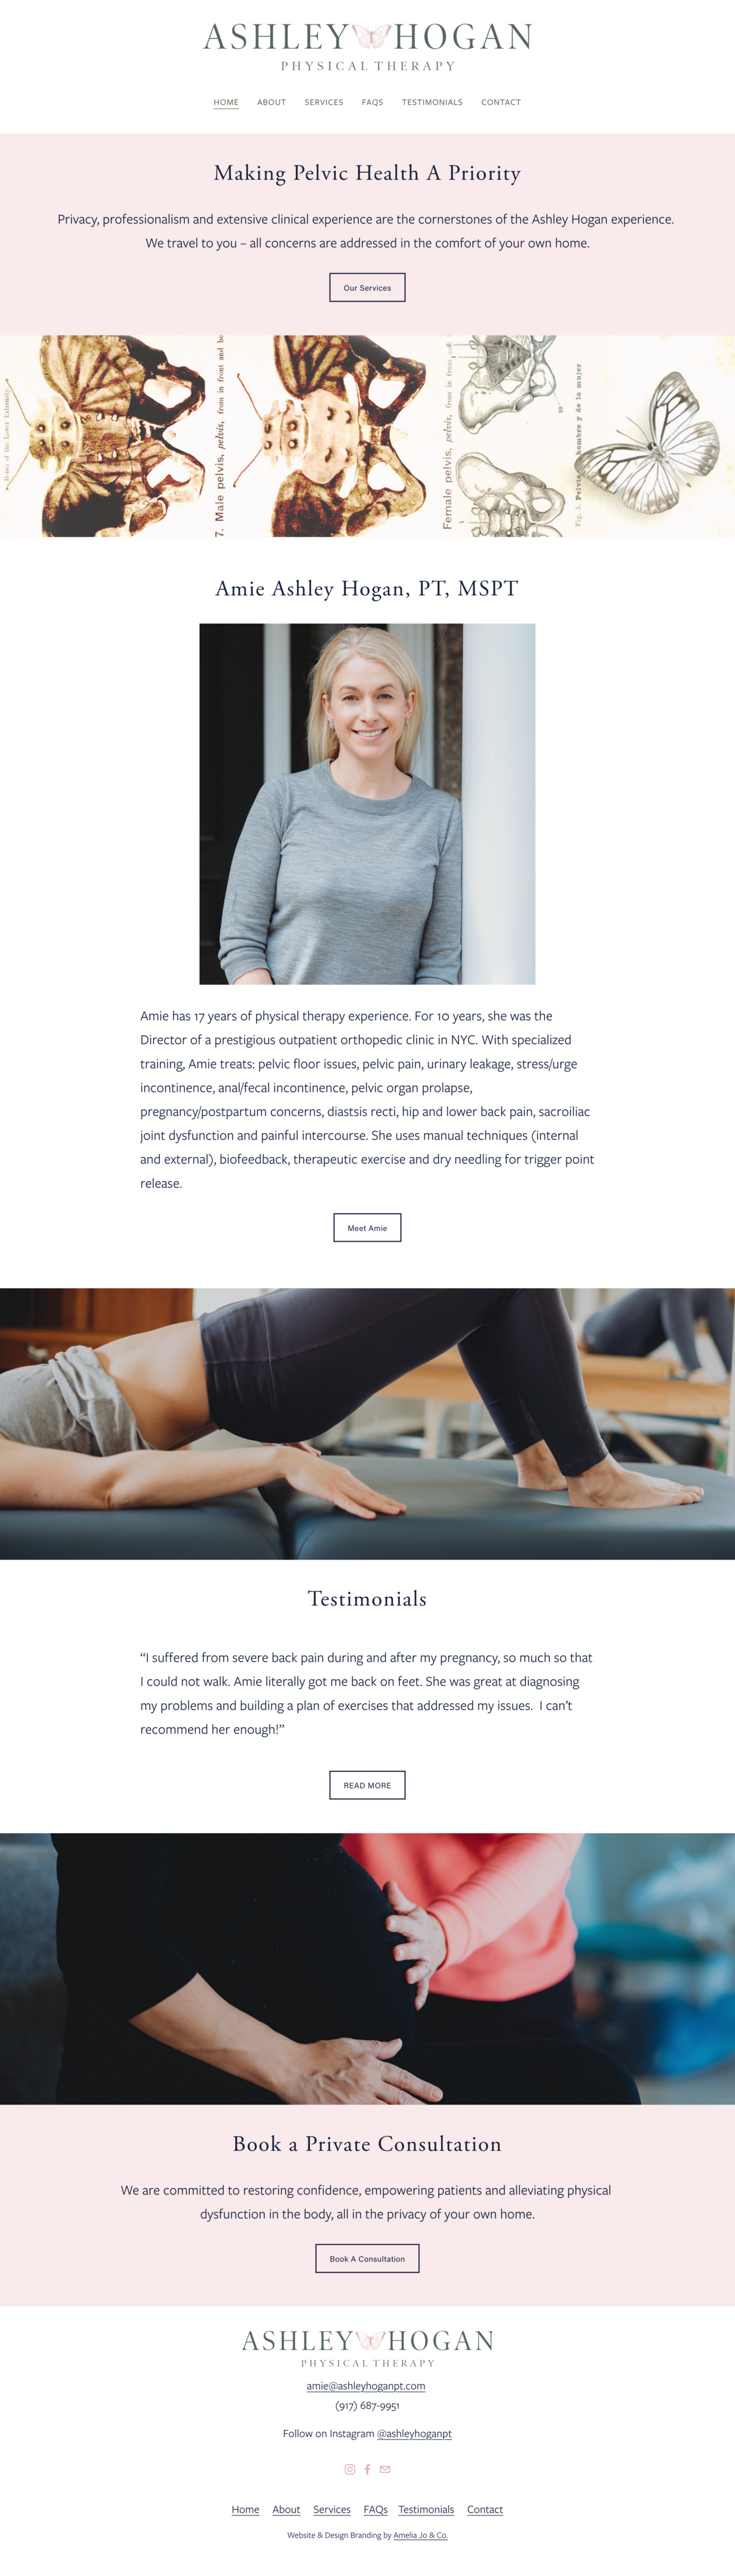 Ashley Hogan Physical Therapy Homepage design featuring log at top, navigation and information below